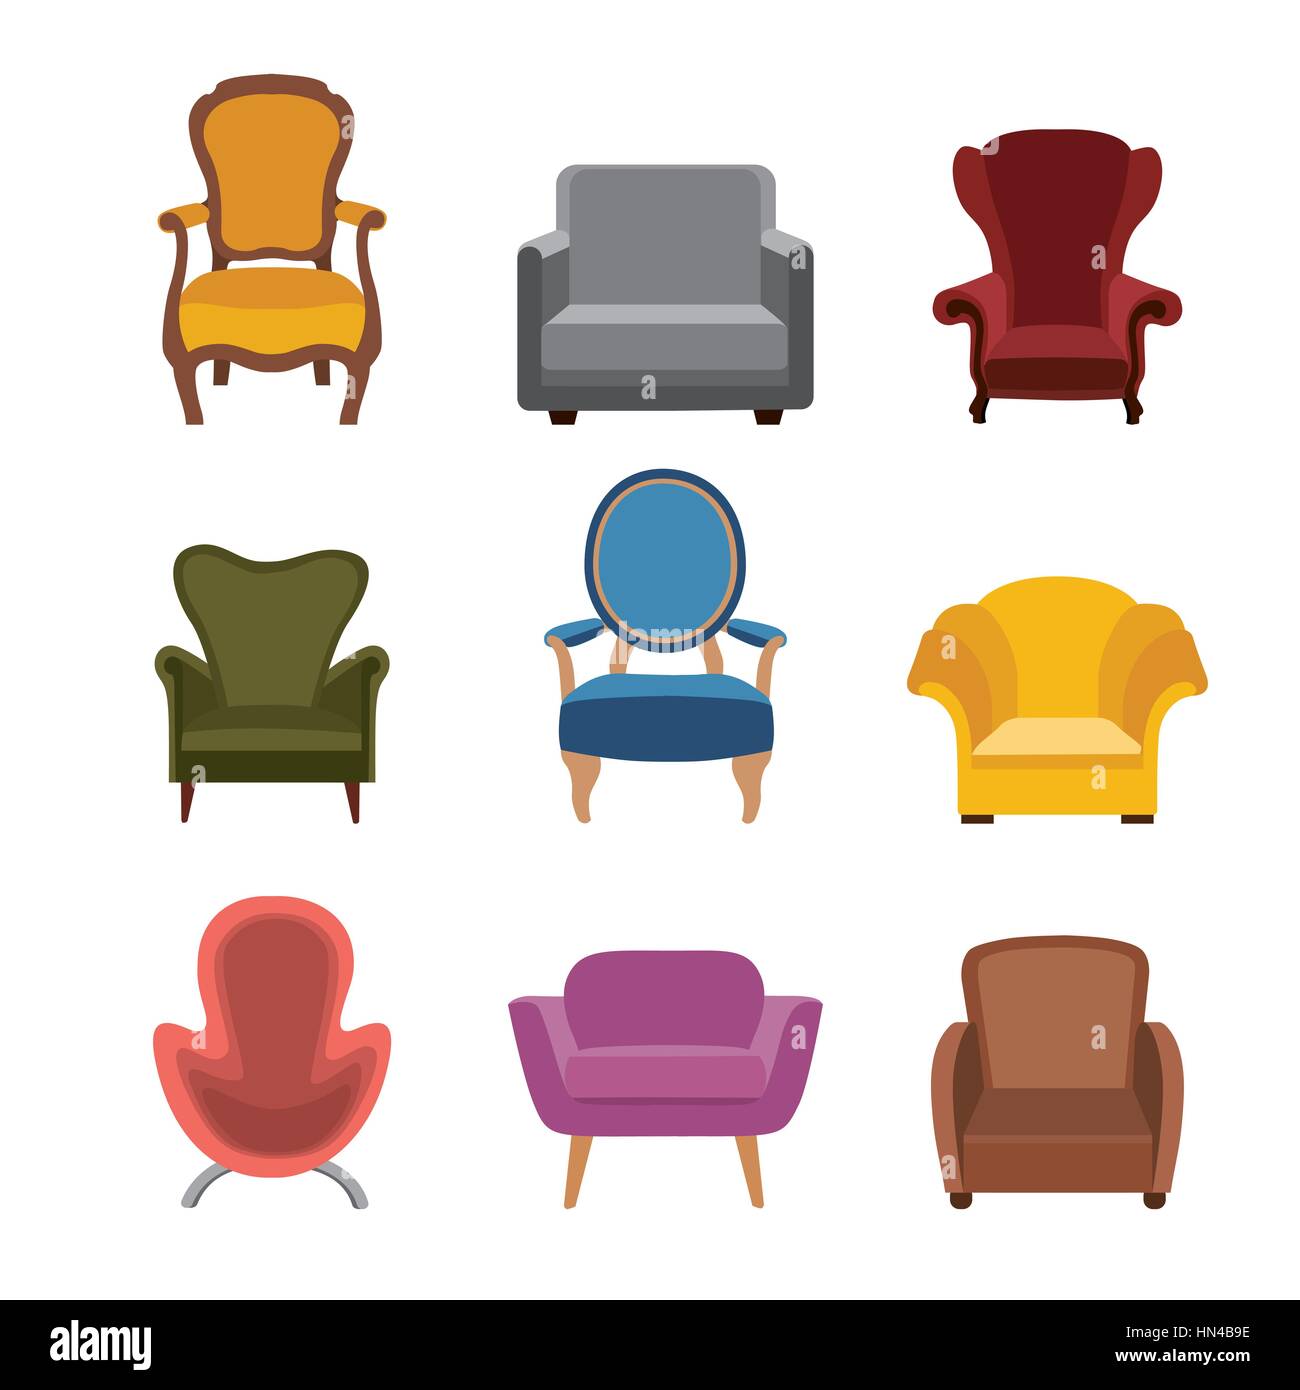 Chairs and armchairs icons set. Furniture collection of different armchairs in flat style. Stock Vector